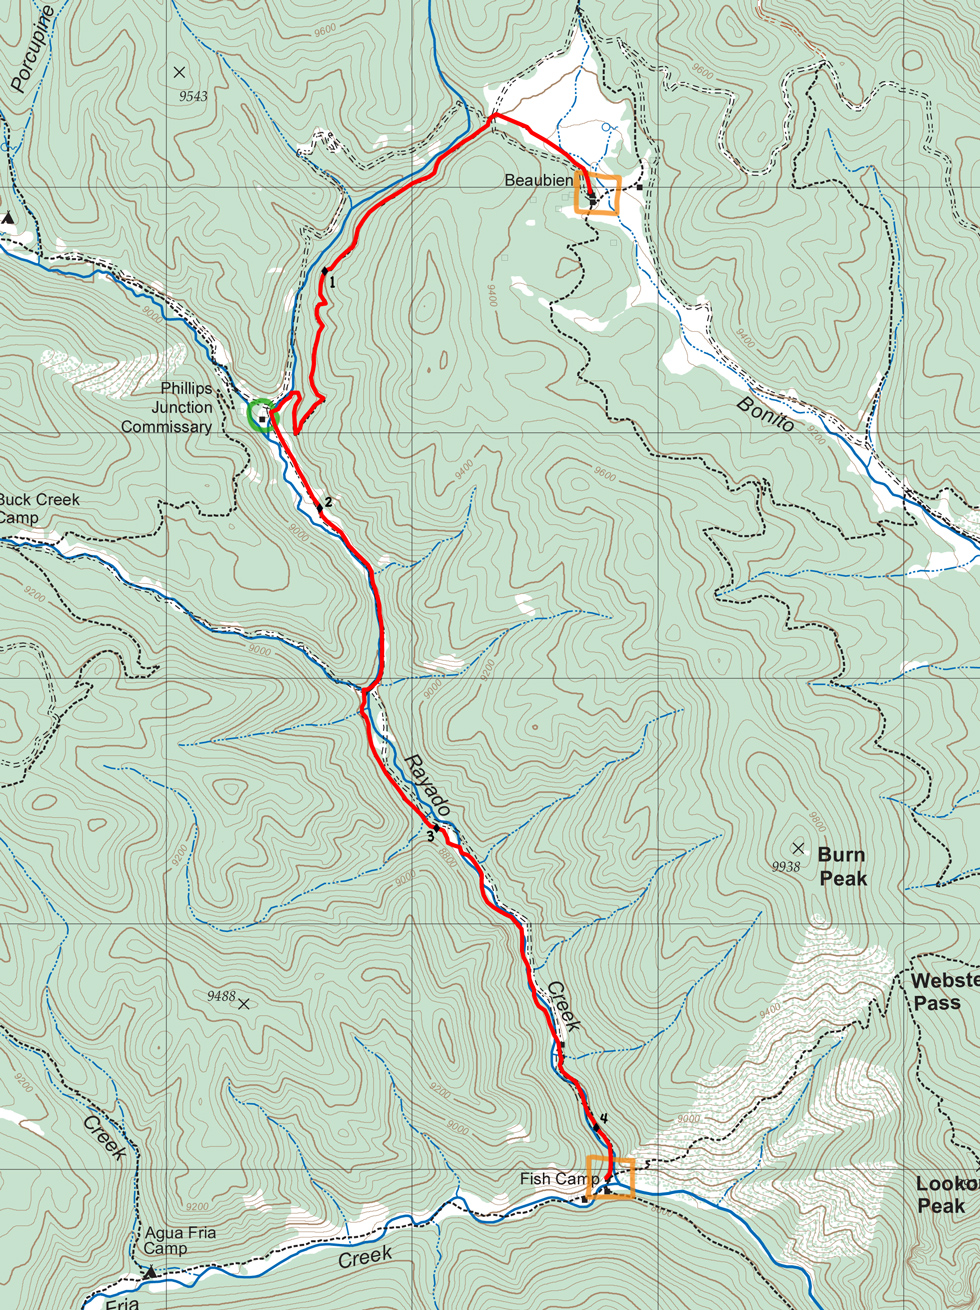 topographic map of reoute from Beaubien to Fish Camp